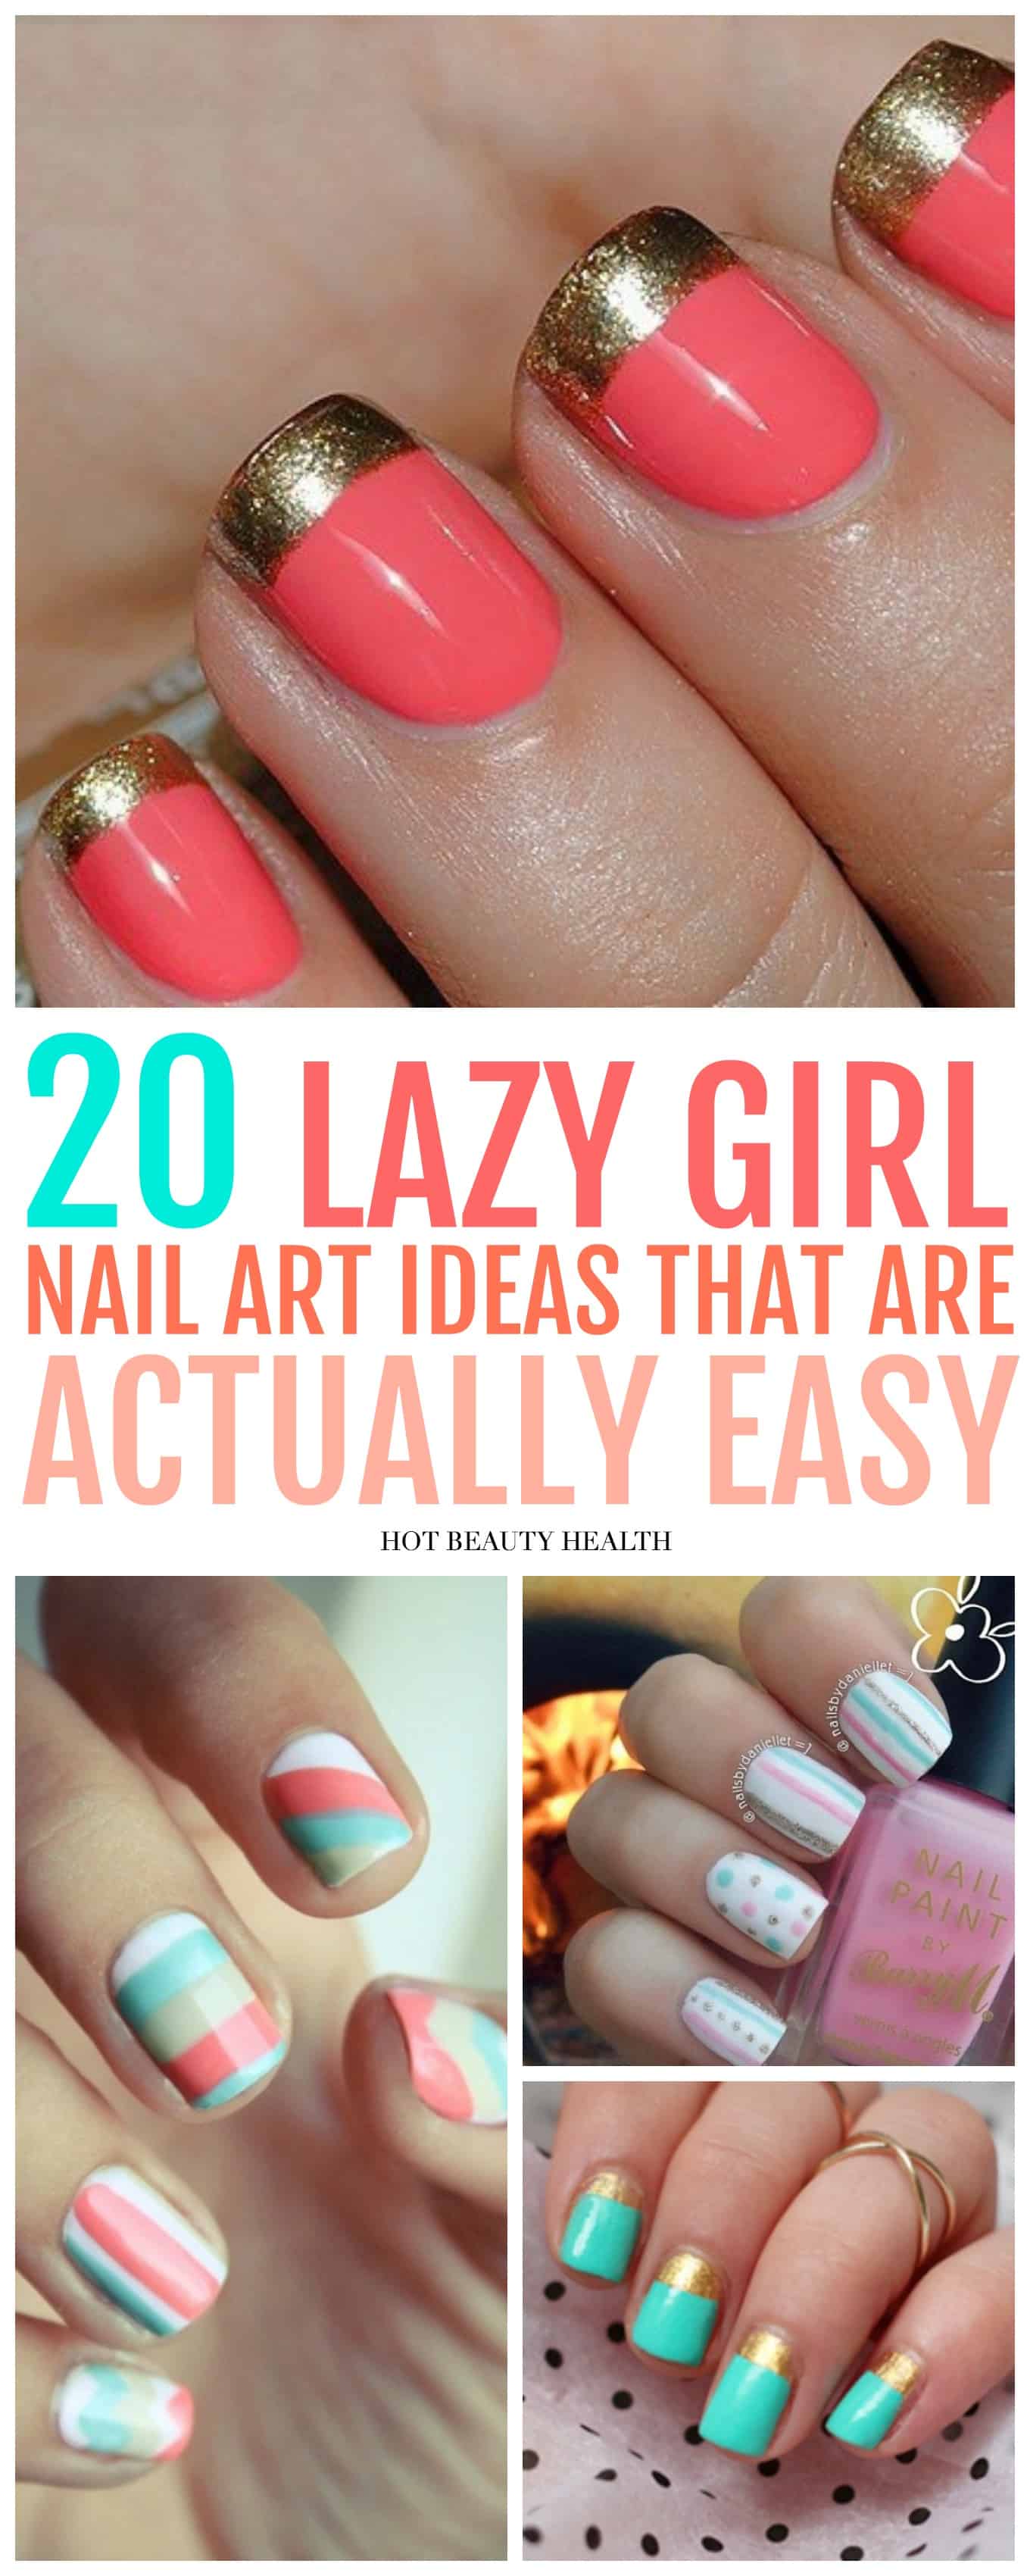 12 Simple Nail Art Designs To Try Out At Home For Beginners - Hiscraves